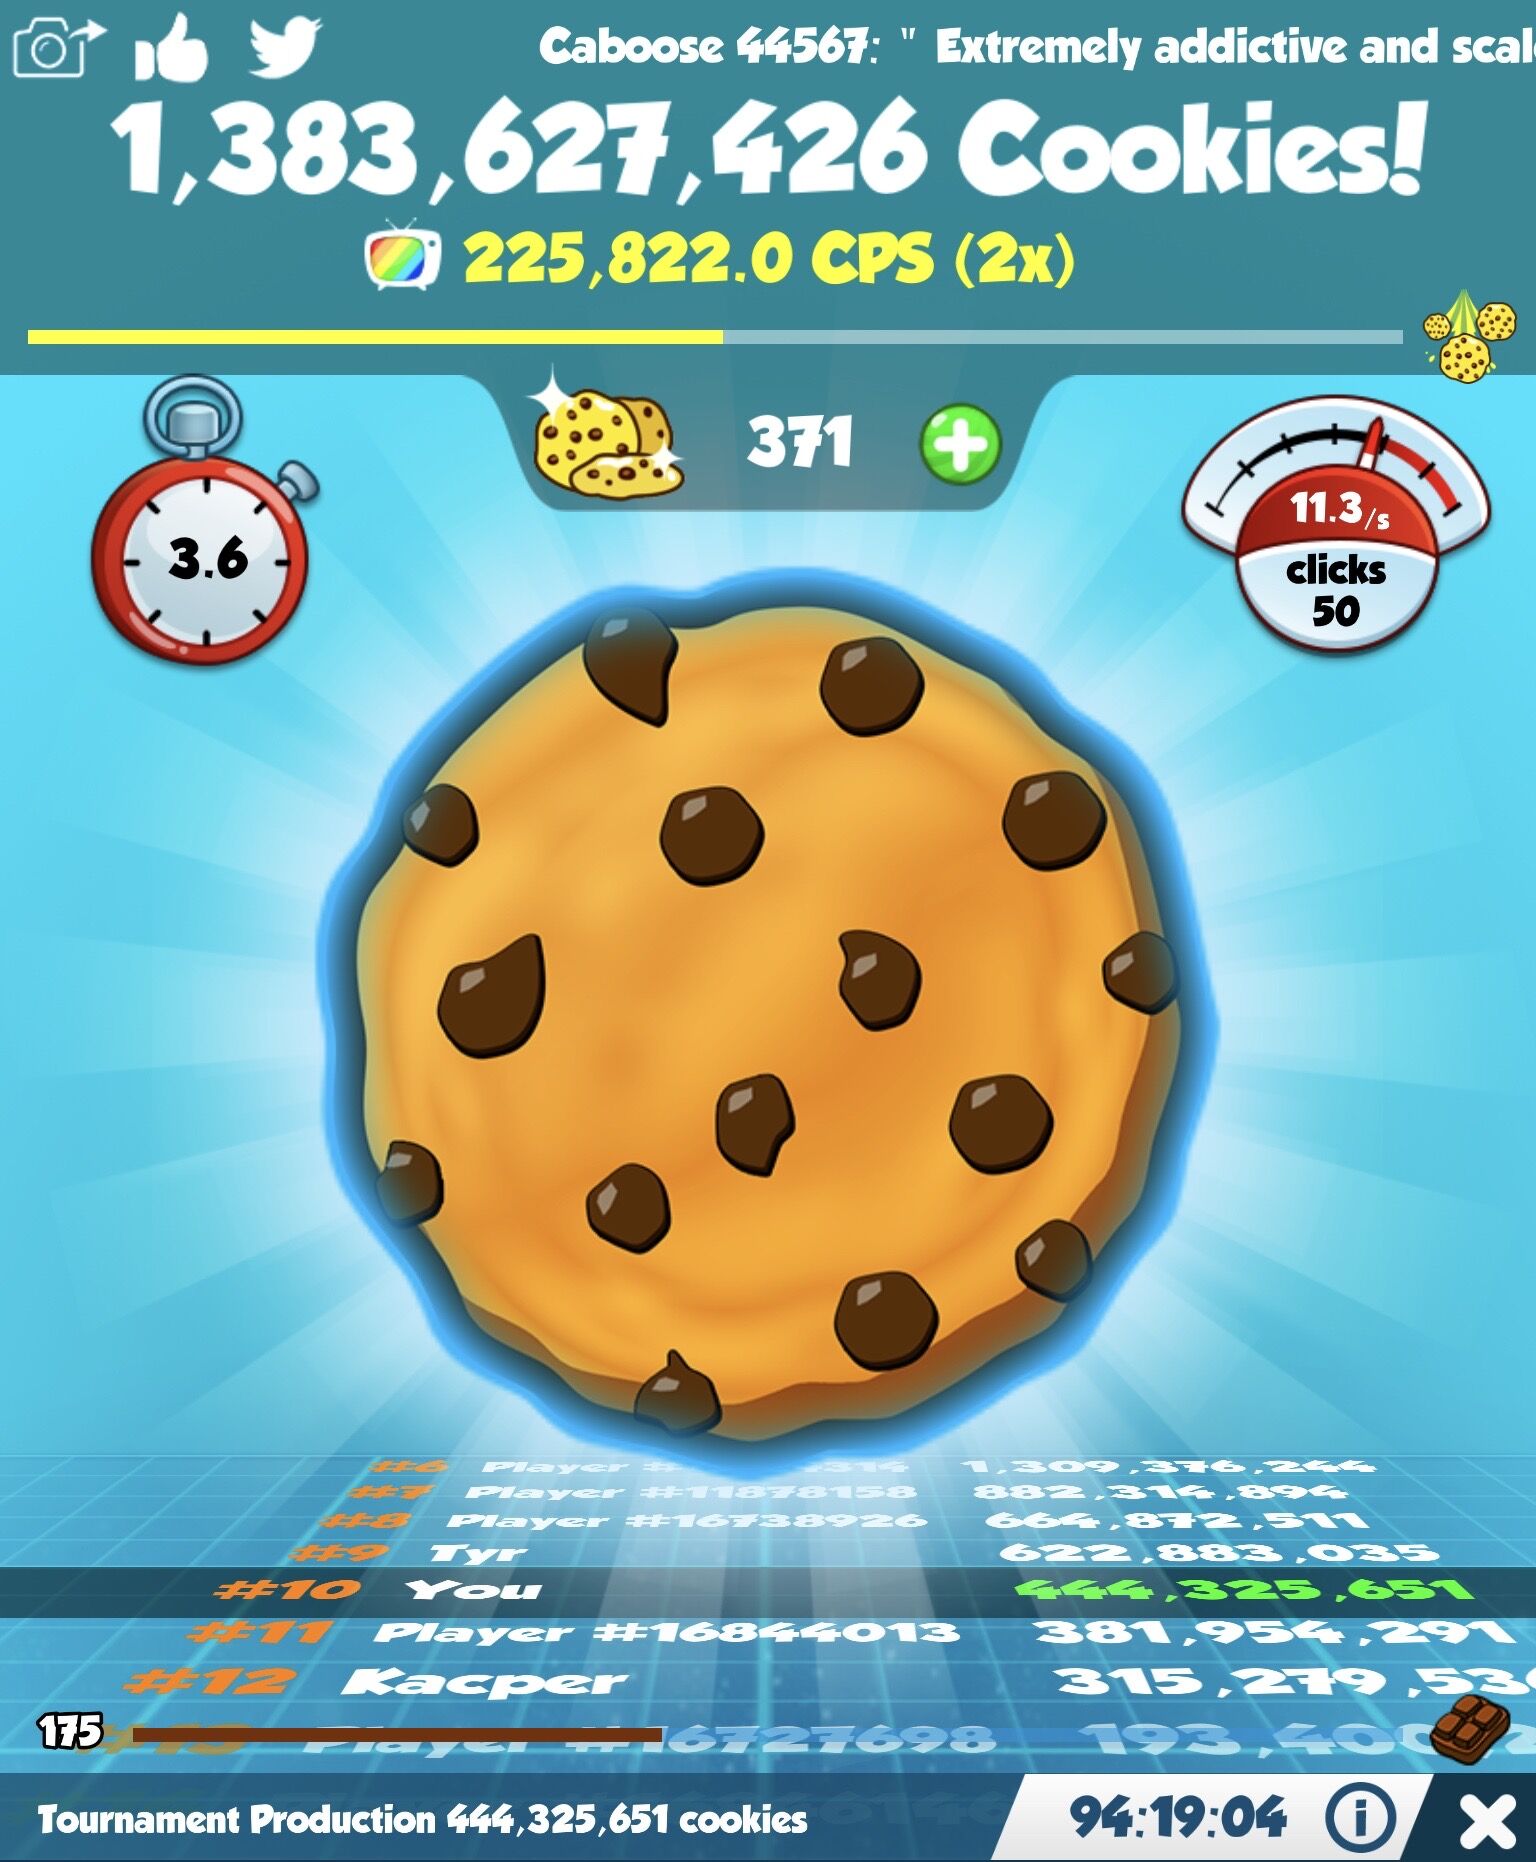 Cookie Clickers 2 Level 51 completed - Keep the x3 multiplier for